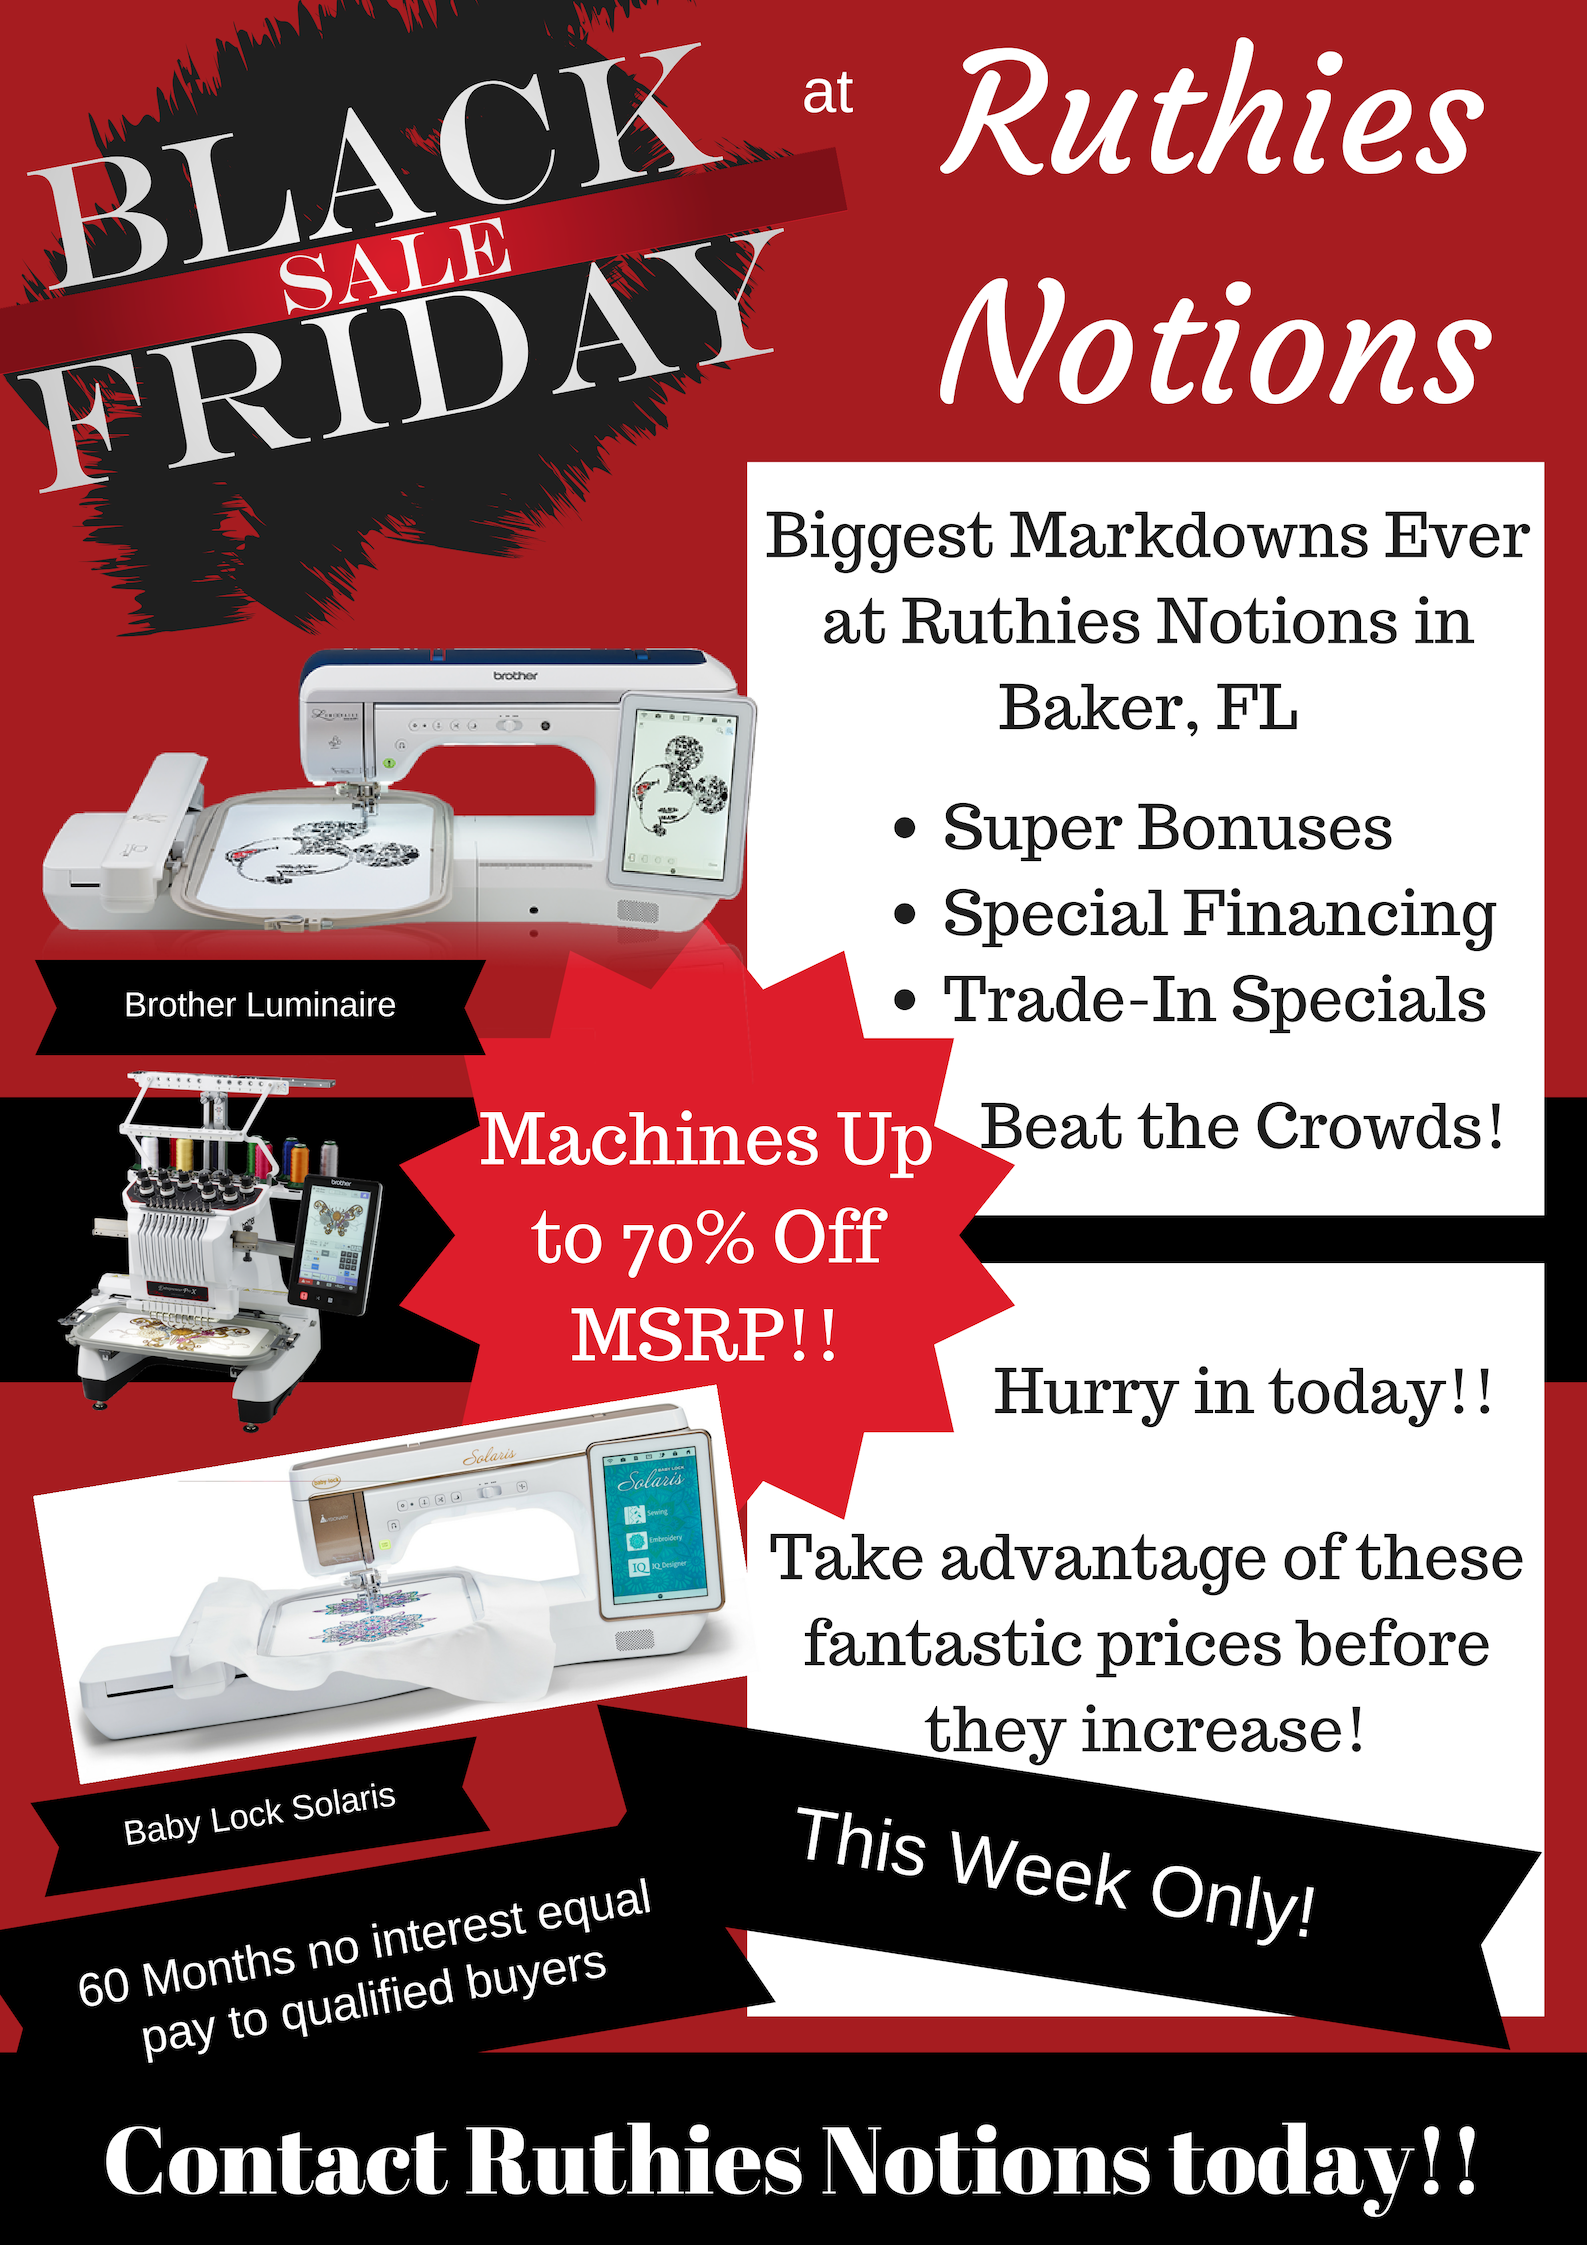 Ruthies Notions Black Friday Special